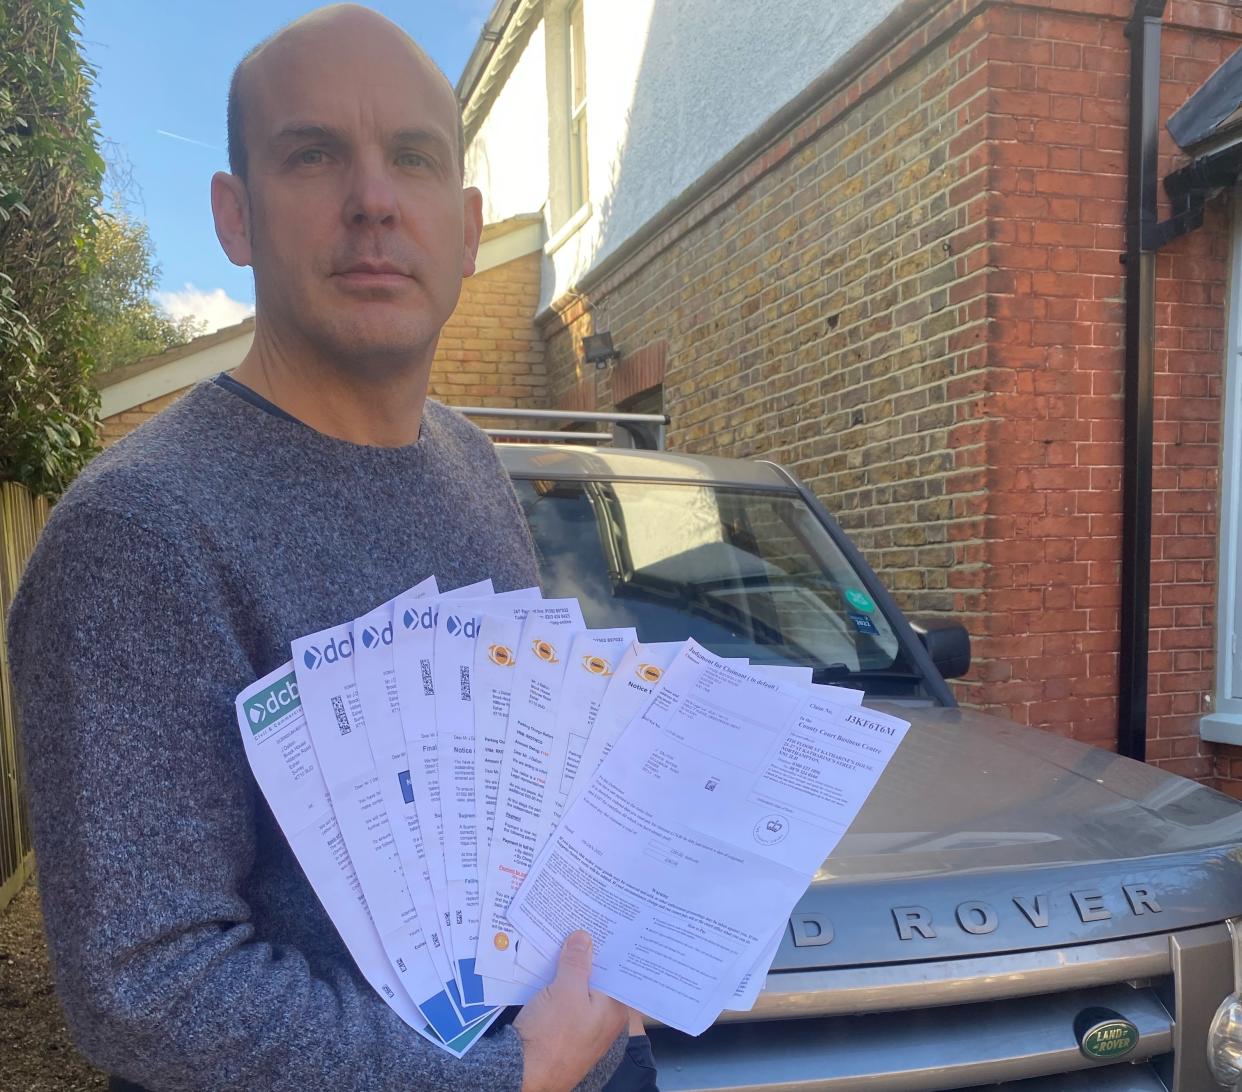 Jeremy Dalton has racked up £2,000 fees contesting a Parking Charge Notice (PCN) issued by I Park Services Ltd in August 2021. (Reach)